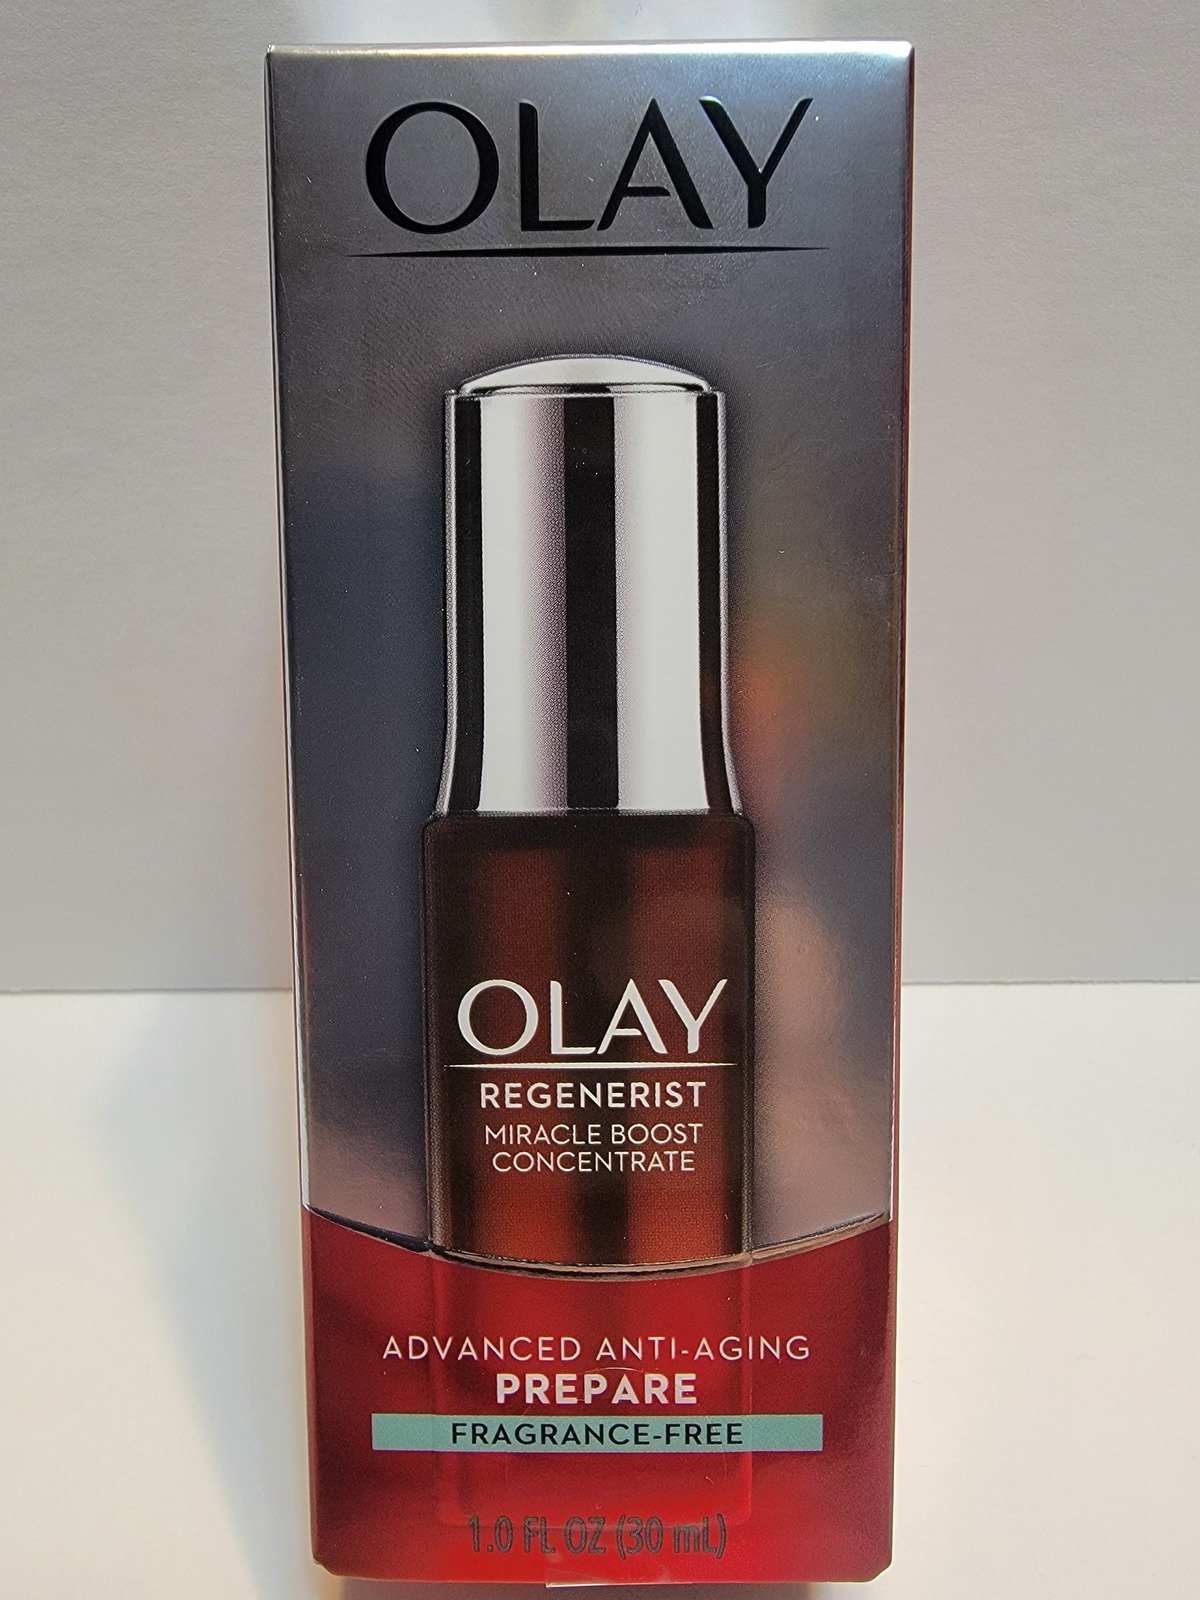 New Olay Regenerist Miracle Boost Concentrate Advanced Anti-Aging Prepare 1.0 Oz - $4.00